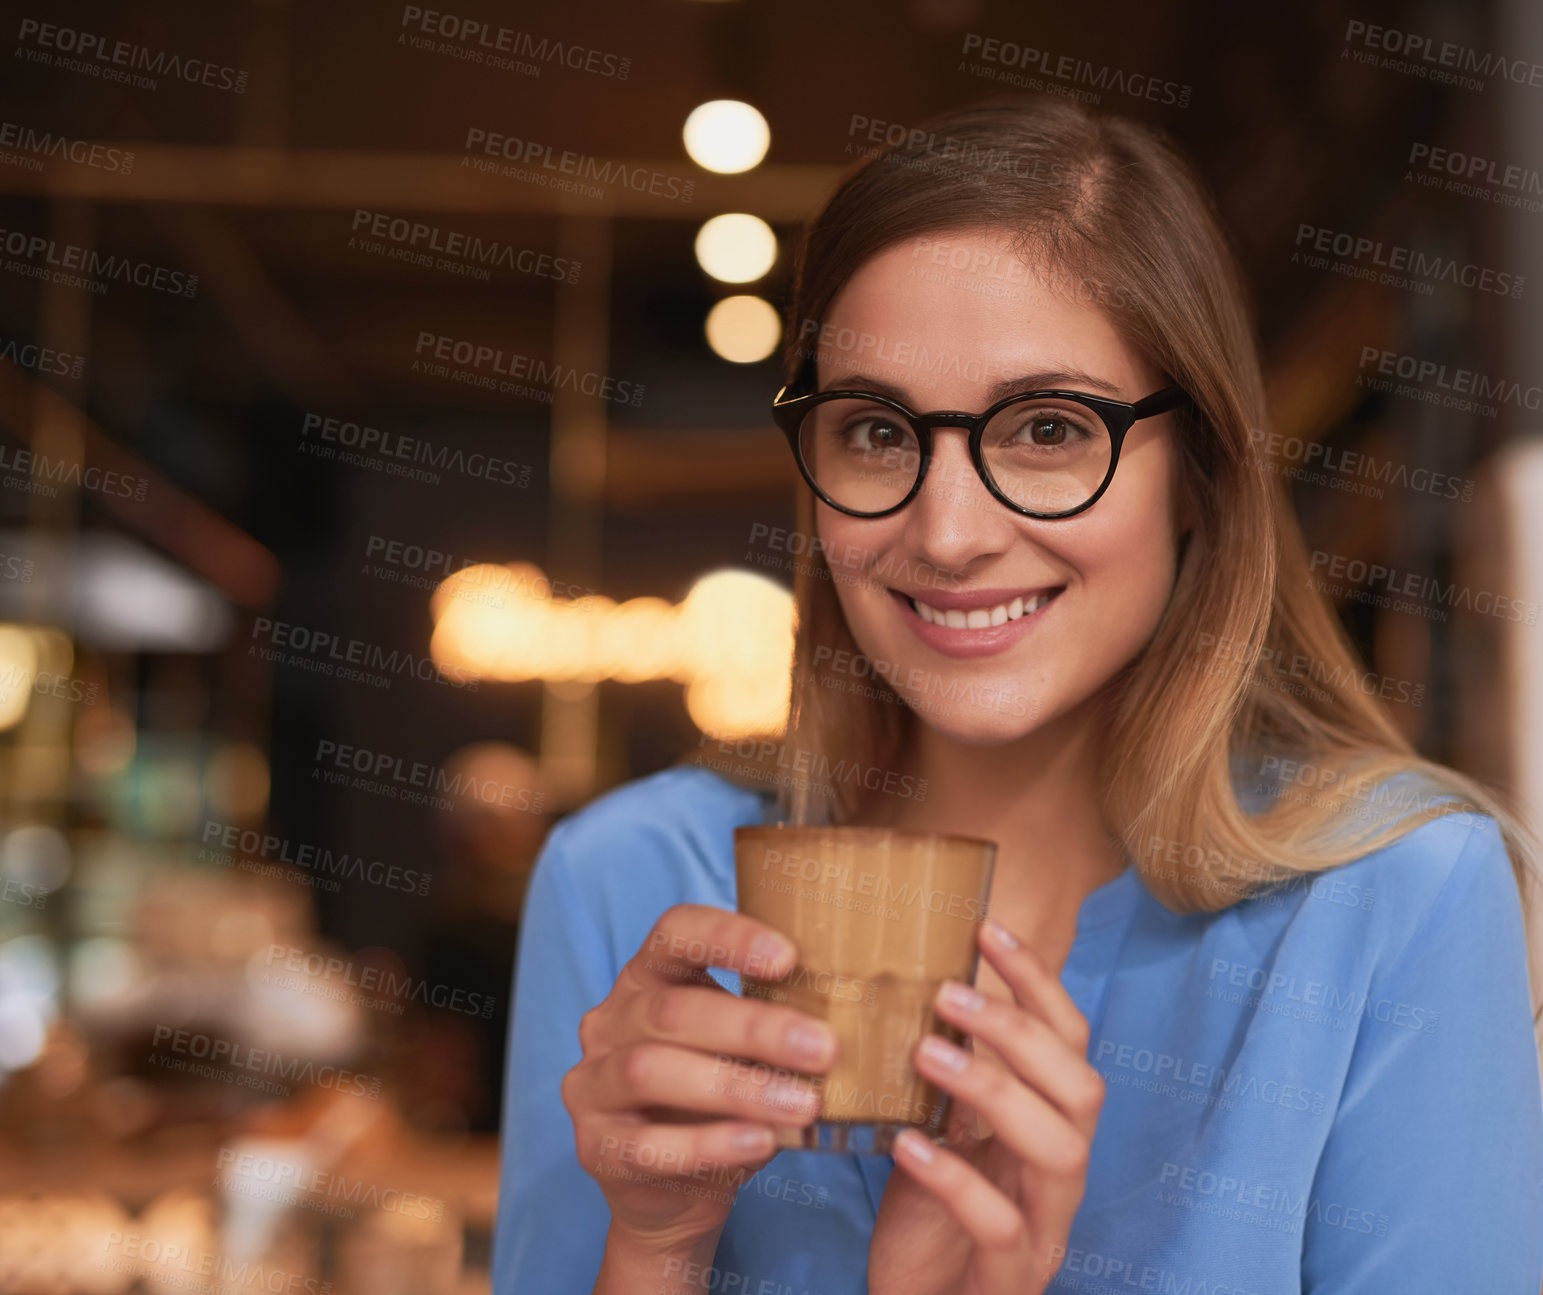 Buy stock photo Cropped portrait of an attractive young woman sitting in a coffee shop